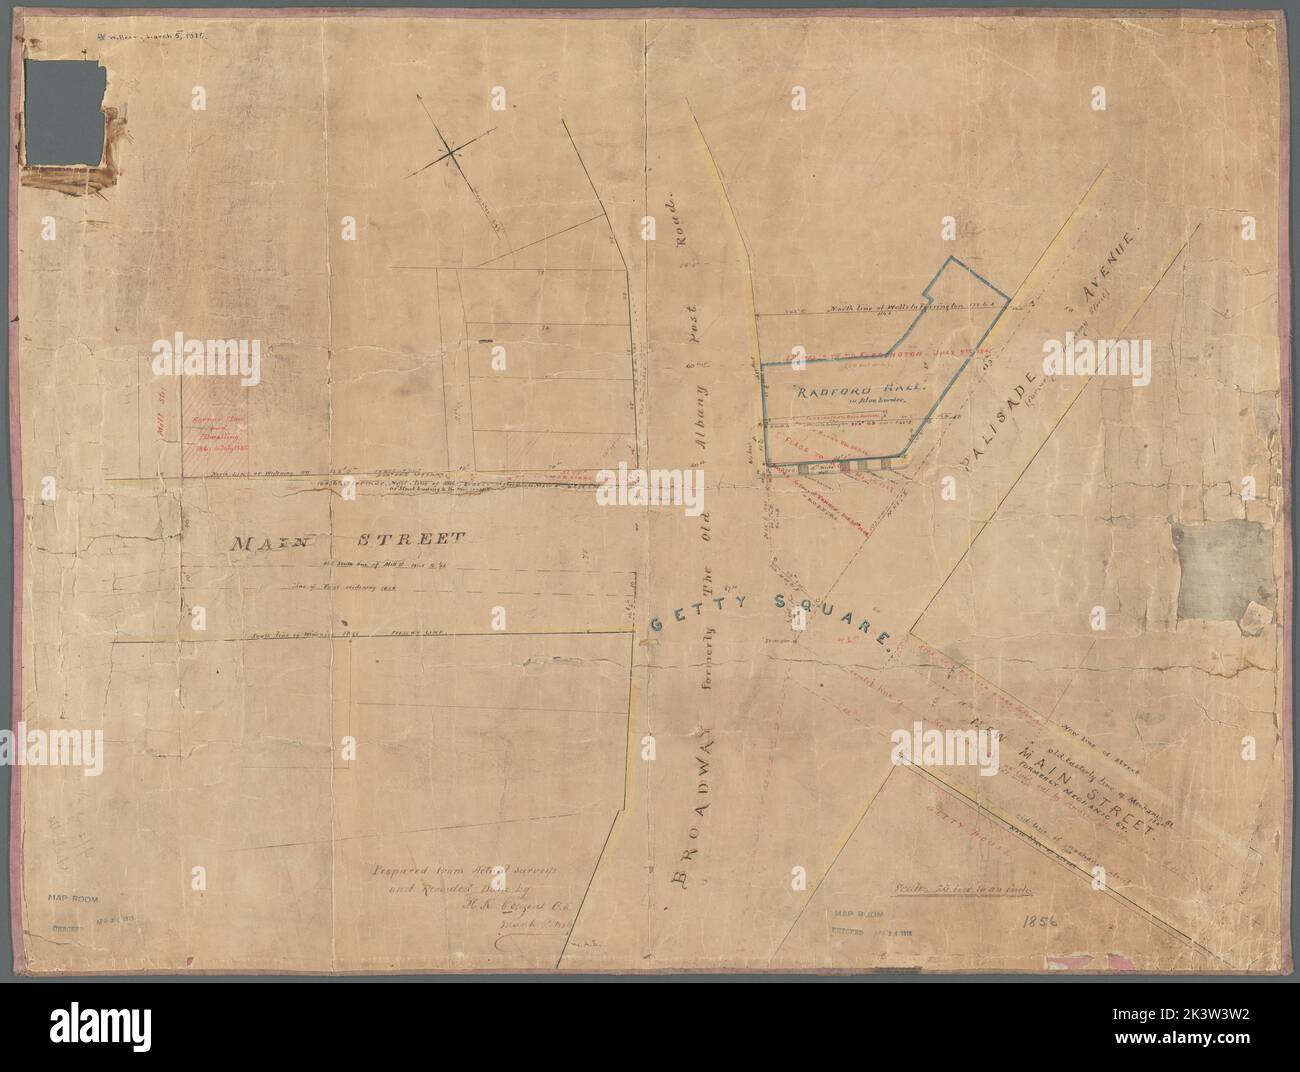 Map of Getty Square, Yonkers: prepared from actual surveys and recorded data / by M.K. Couzens, c.e., March 8th, 1886 1886. Cartographic. Maps, Manuscript maps, Cadastral maps. Lionel Pincus and Princess Firyal Map Division. Landowners , New York (State) , Yonkers, Real property , New York (State) , Yonkers, Yonkers (N.Y.) Stock Photo